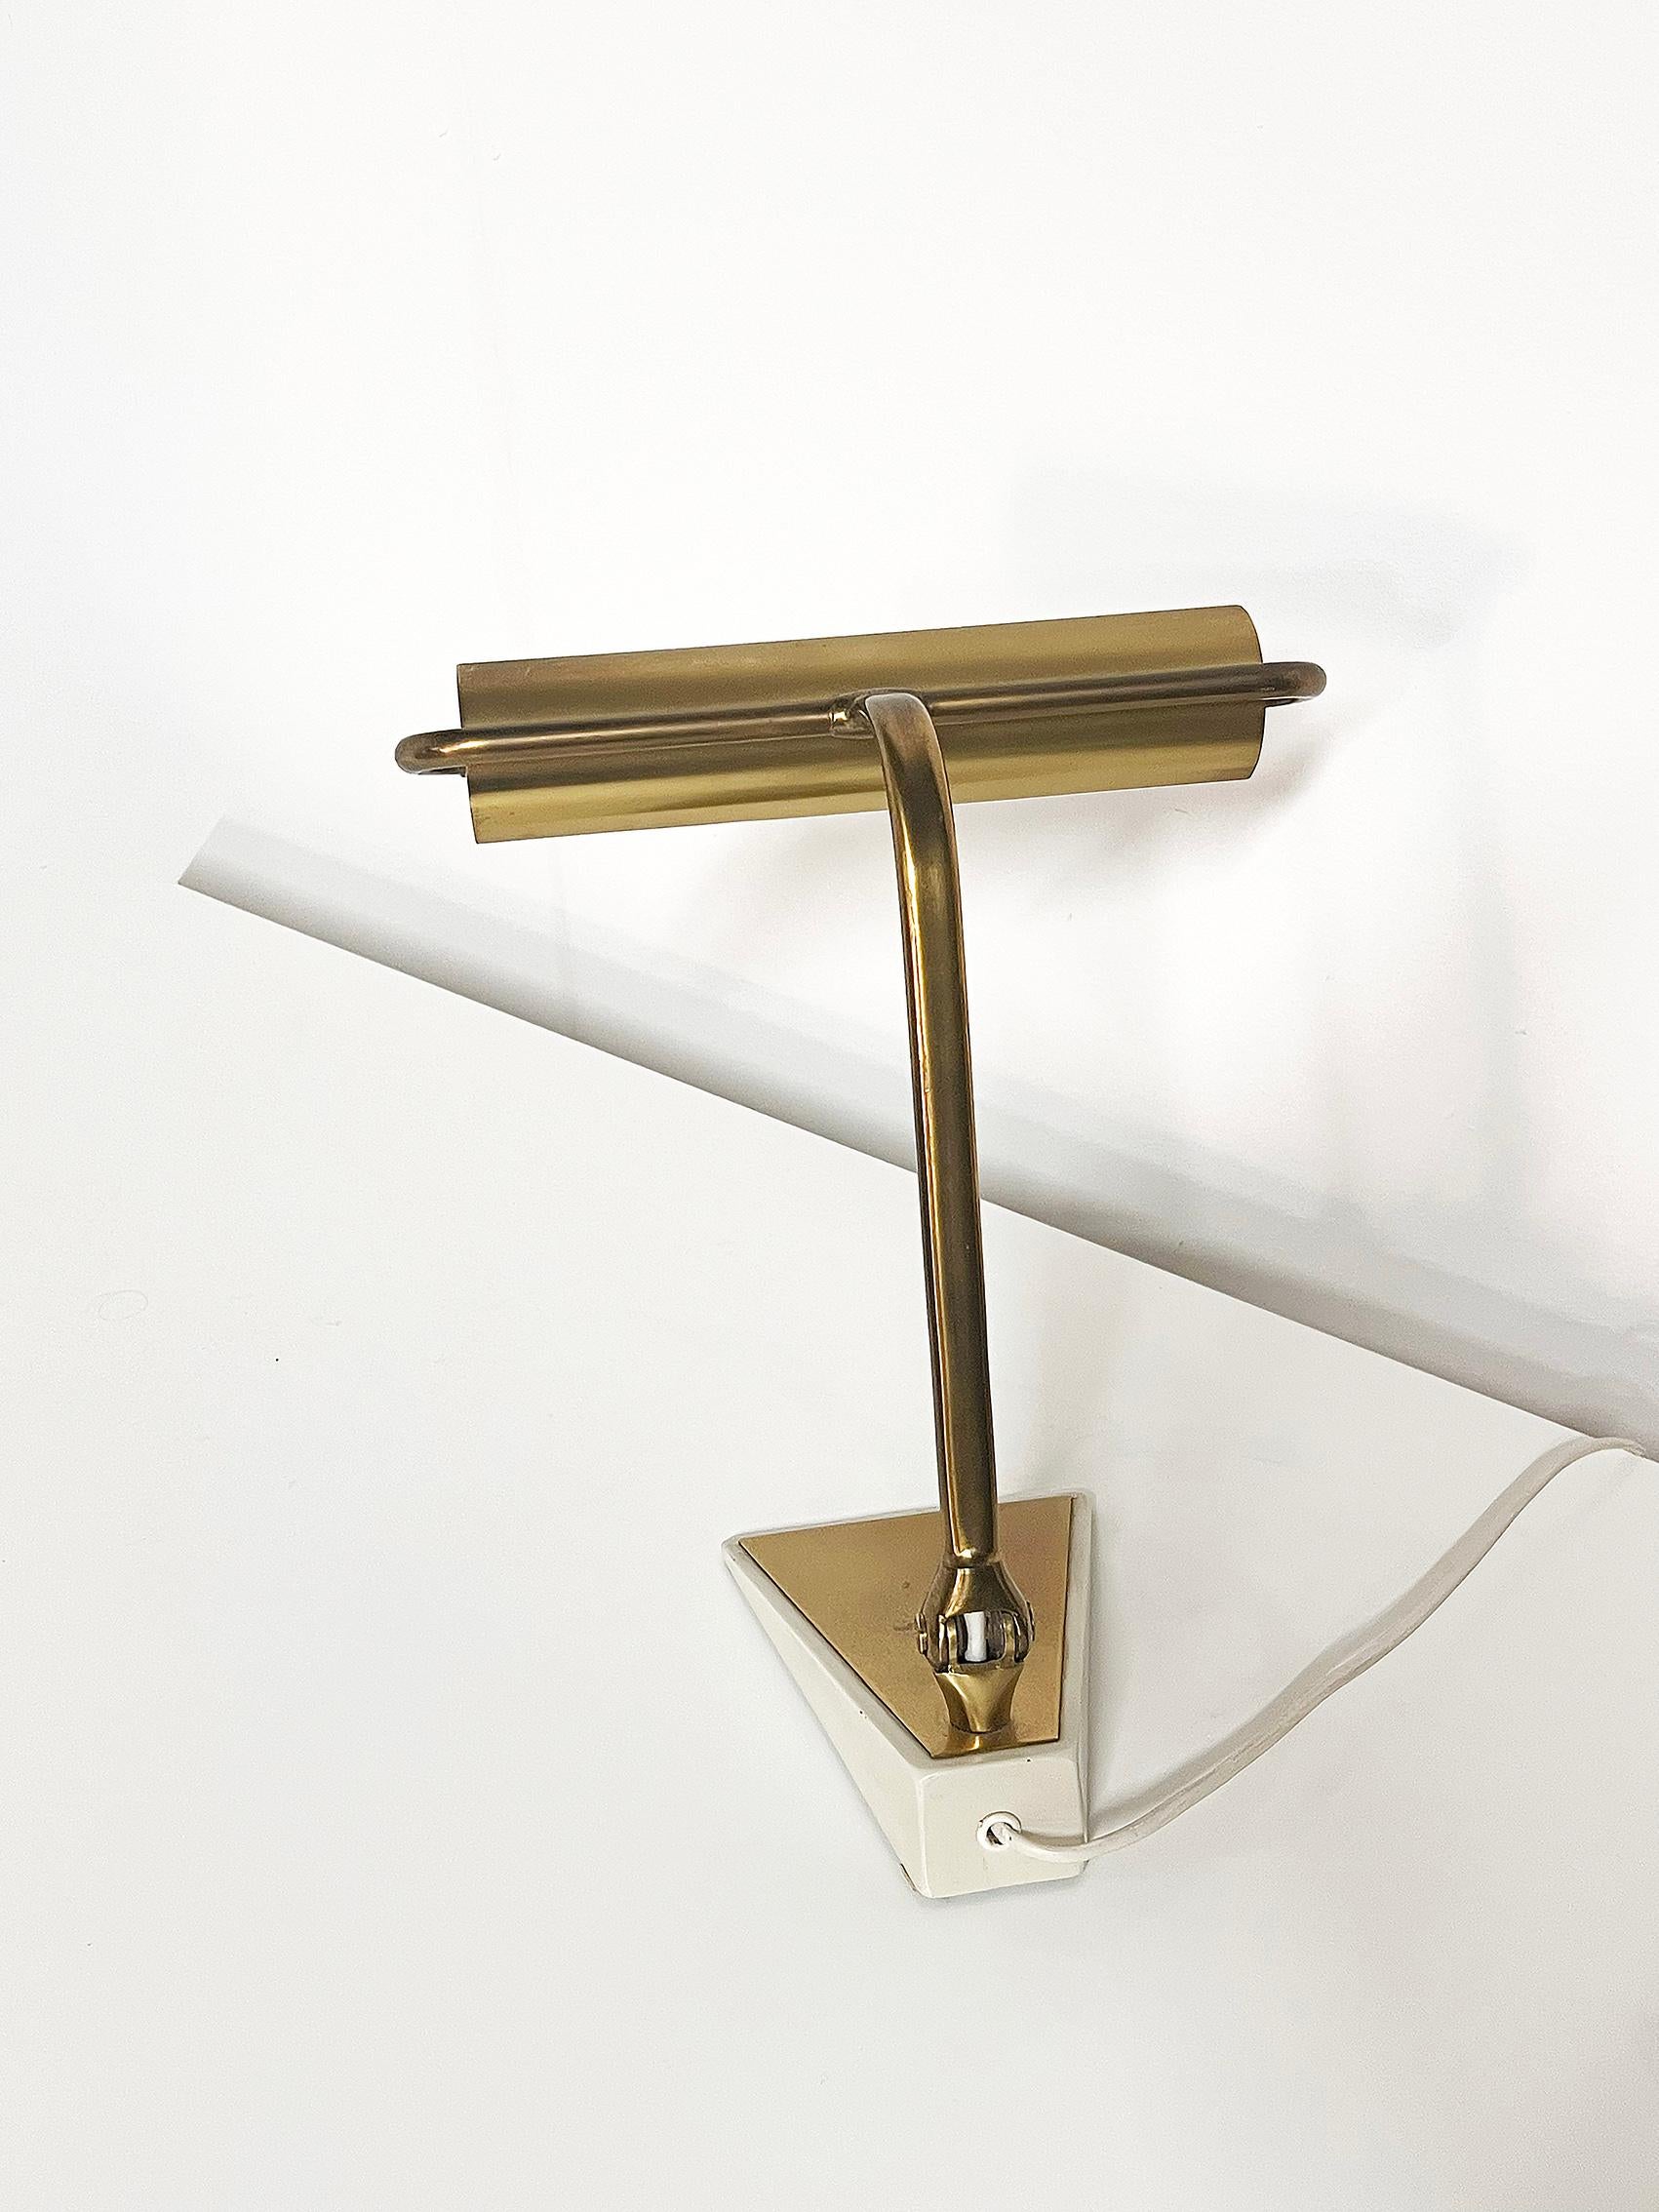 Scandinavian Modern Table Lamp in Brass by Boréns ca 1950-1960's In Good Condition For Sale In Örebro, SE